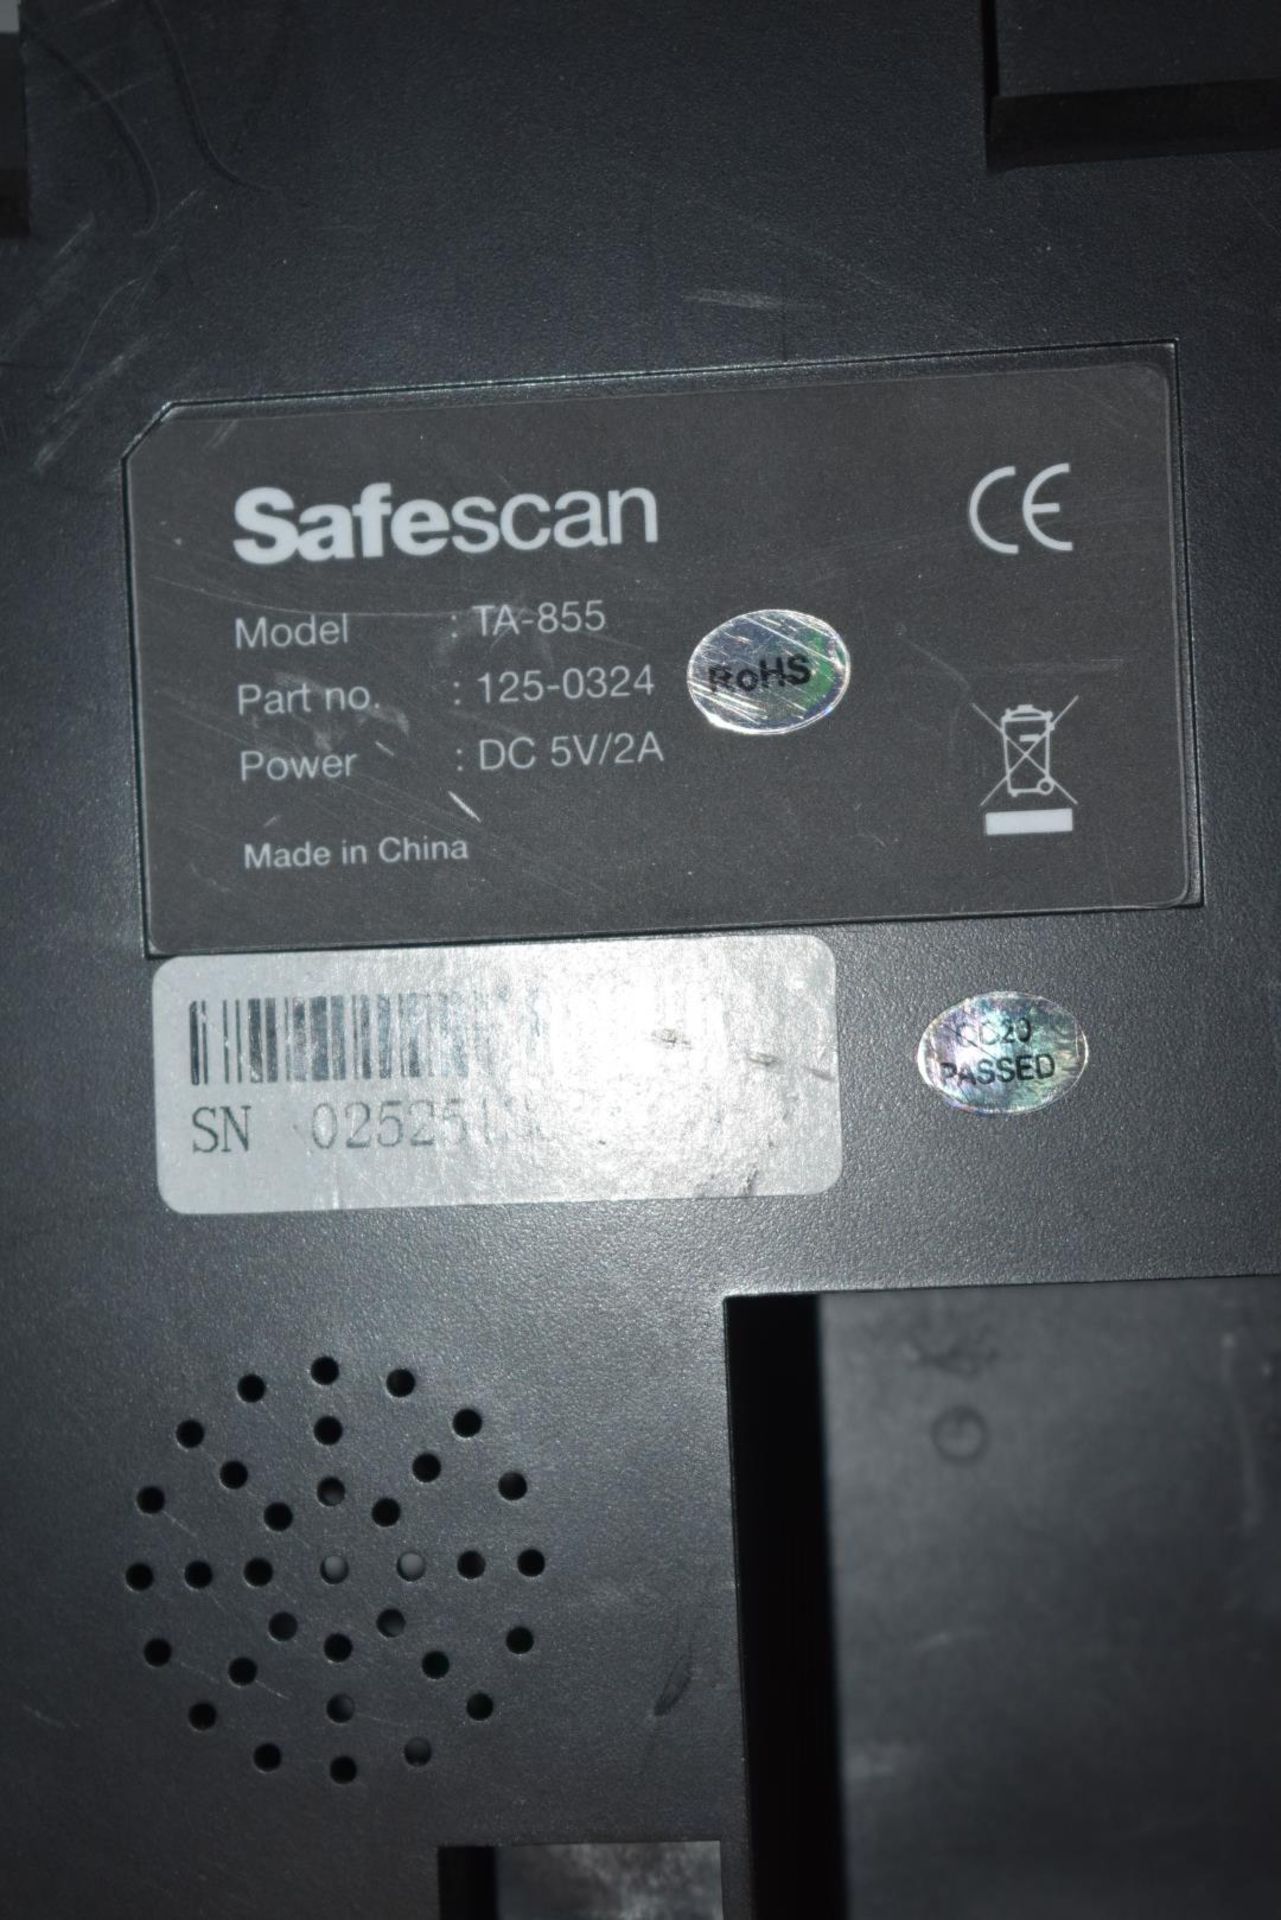 1 x Safescan TA-855 Time Attendance Finger Print Scanner System With Power Cable Ref LF249 WH - - Image 2 of 2